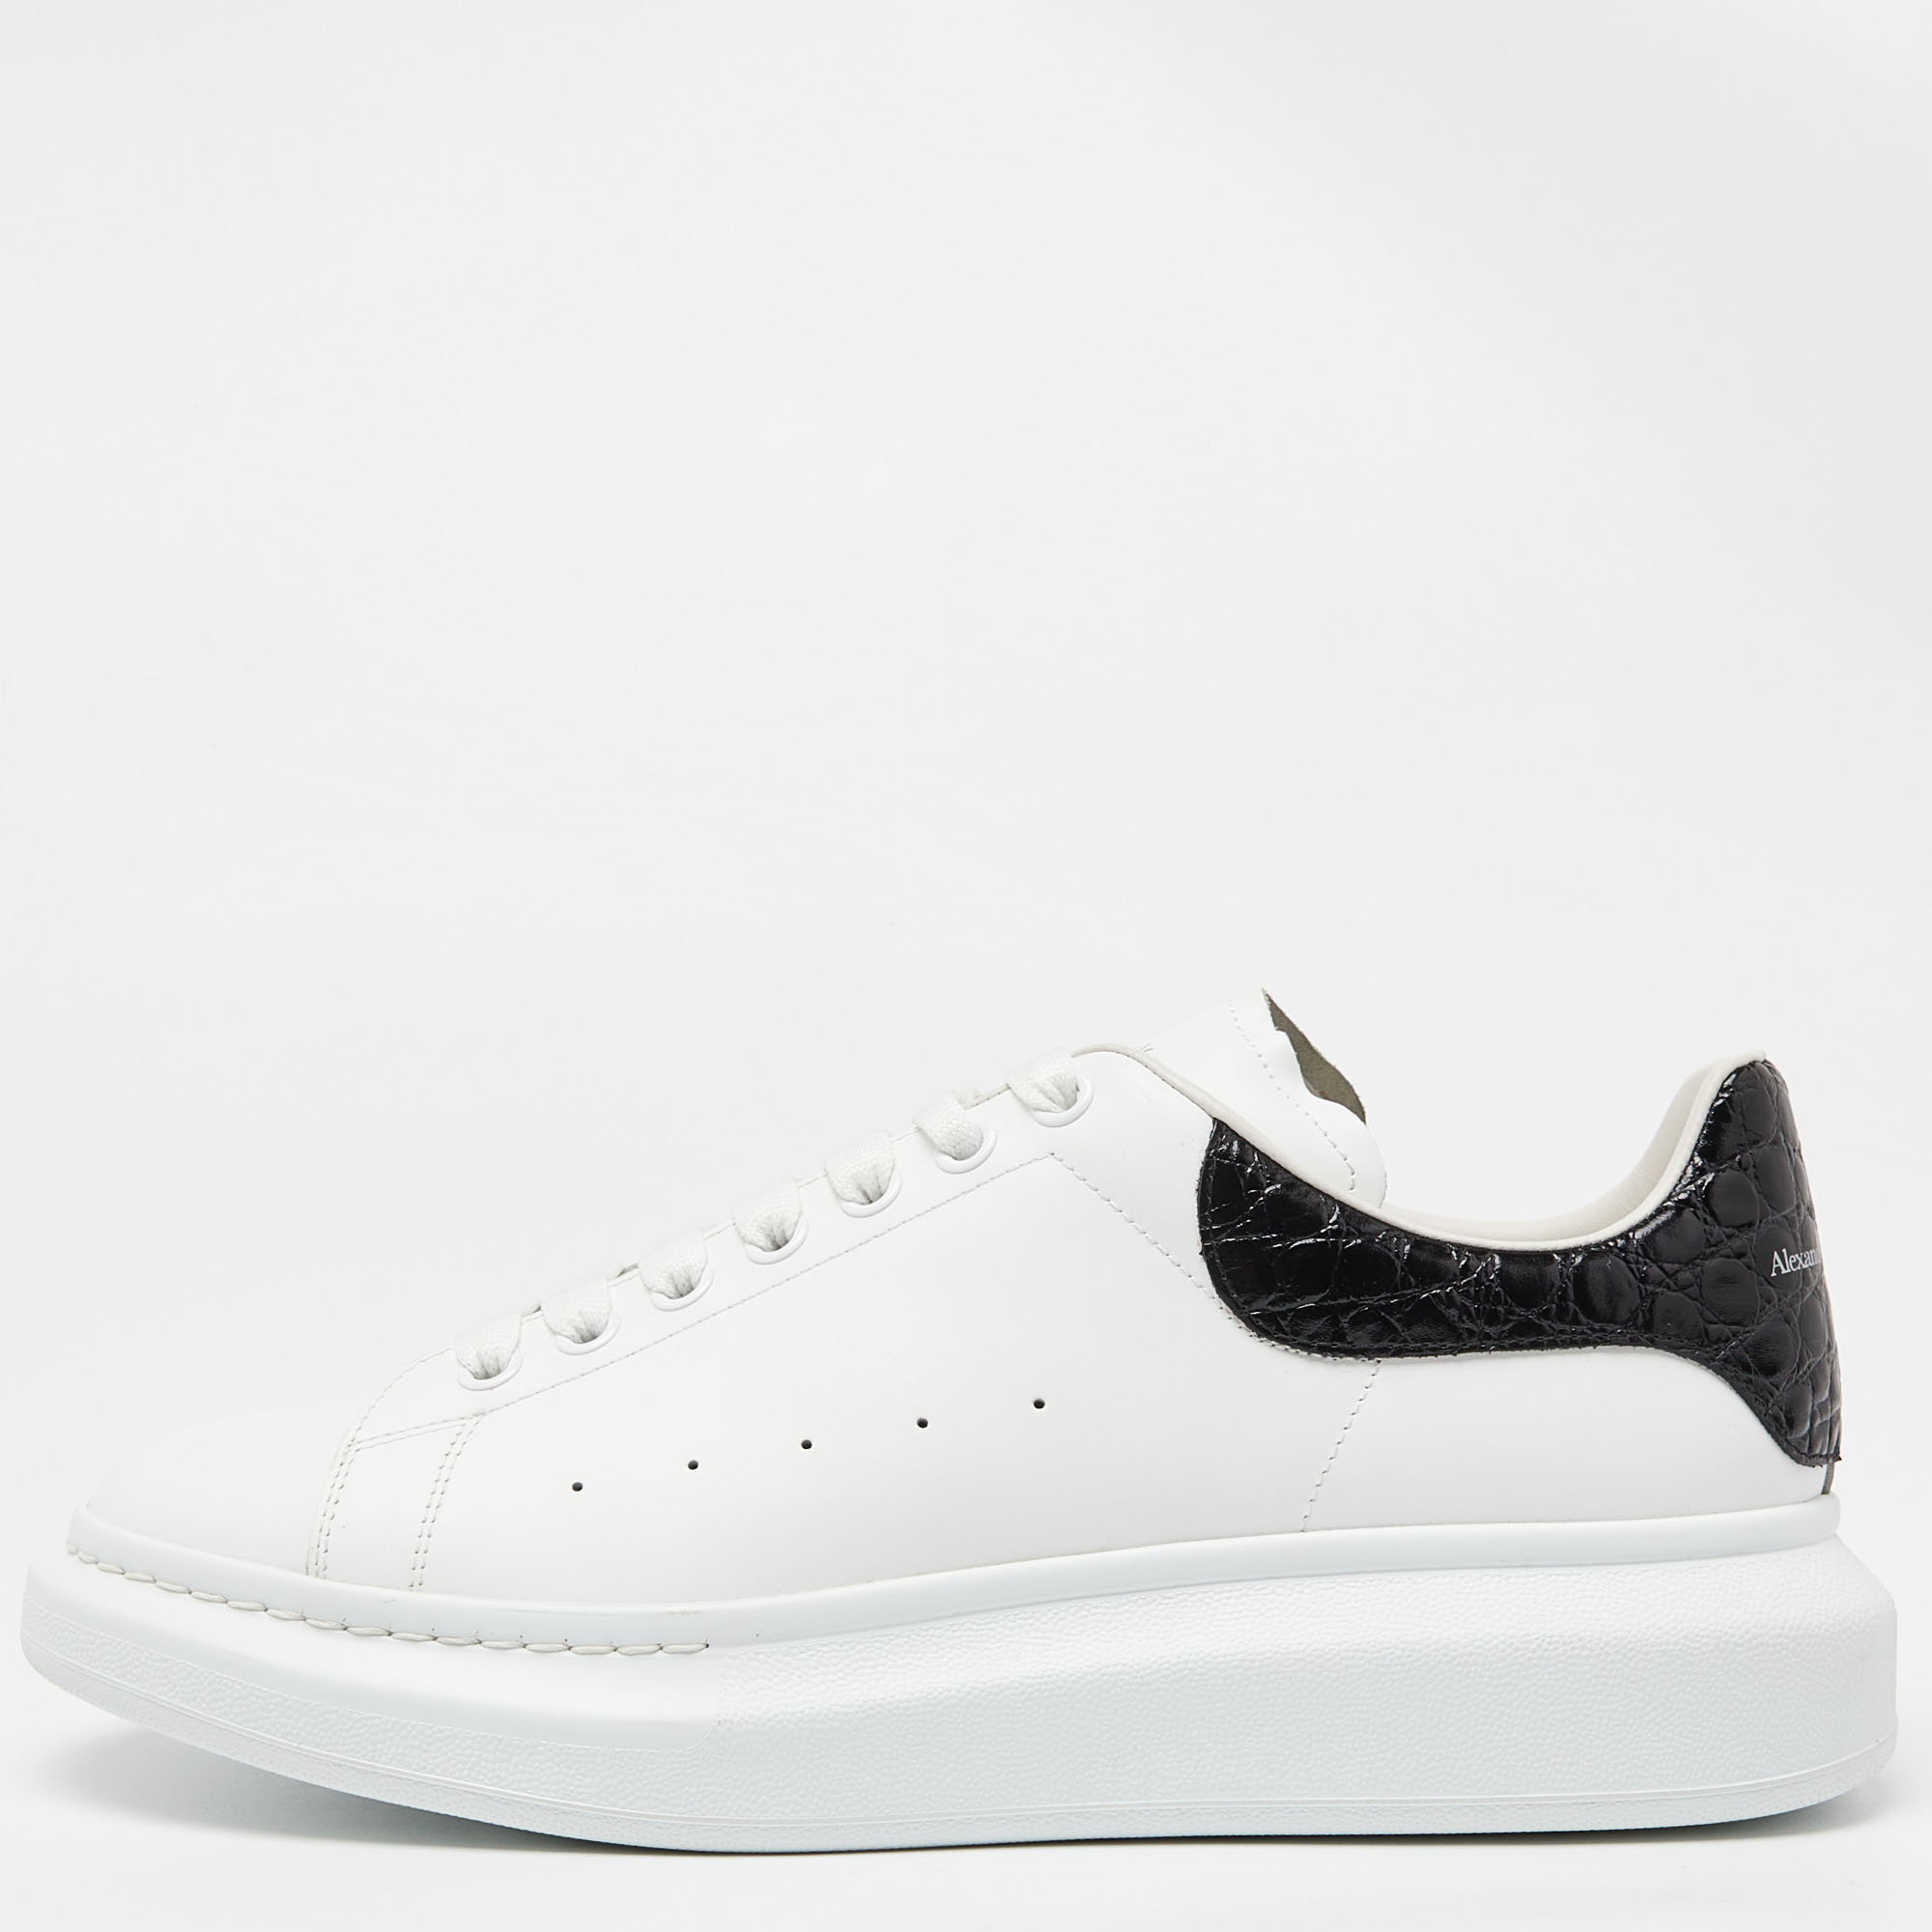 Alexander mcqueen white leather oversized low top sneakers size 45